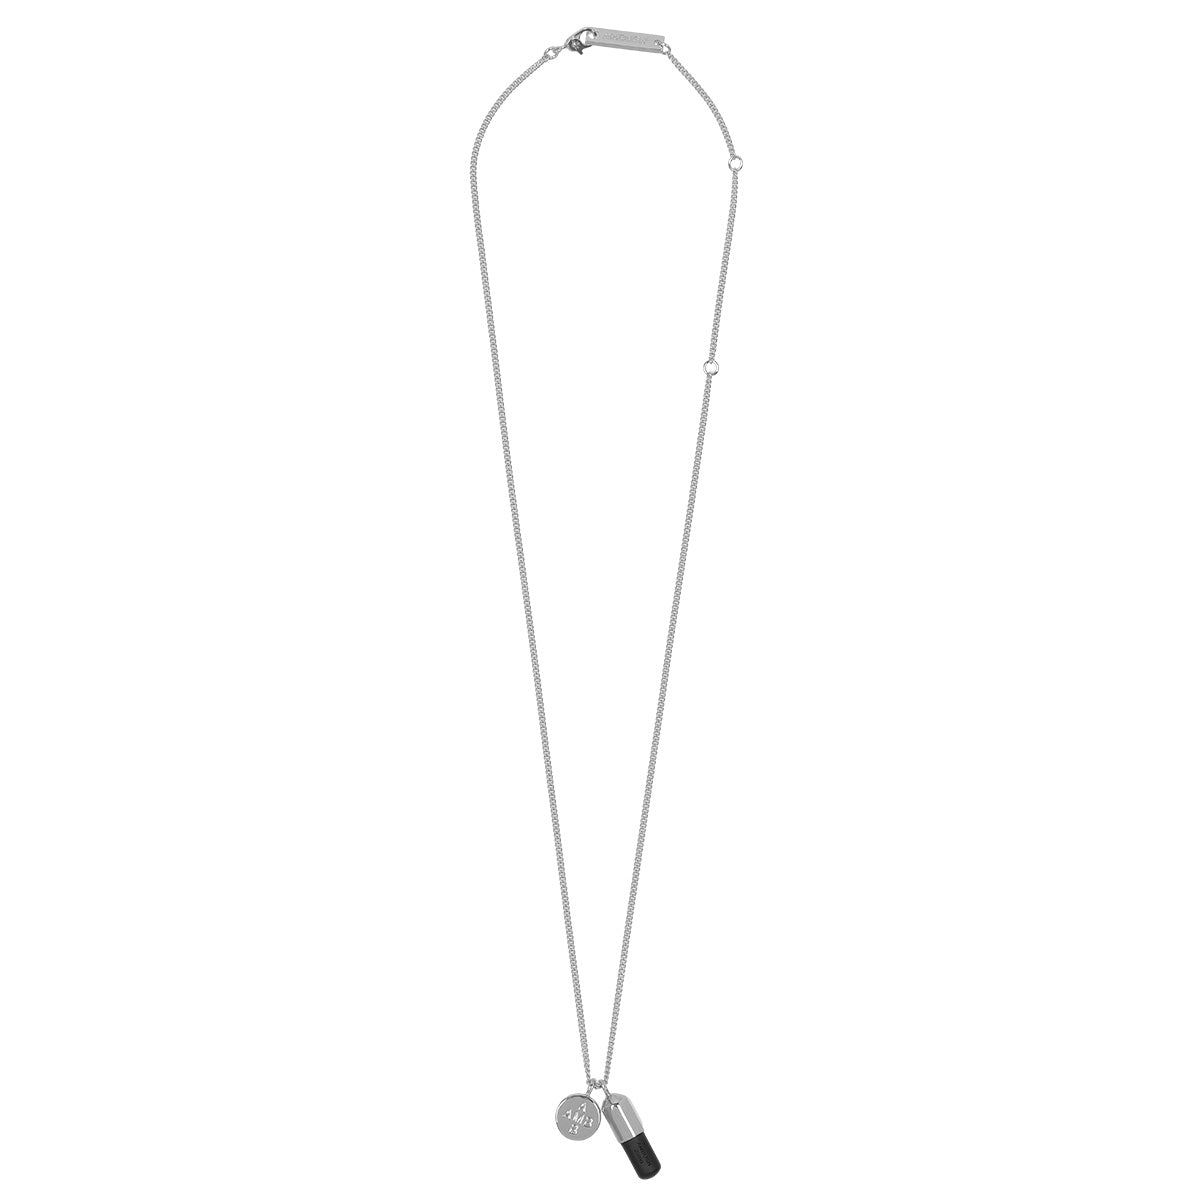 RICK OWENS (リック・オウエンス) - TRUNK CHARM NECKLACE ネックレス